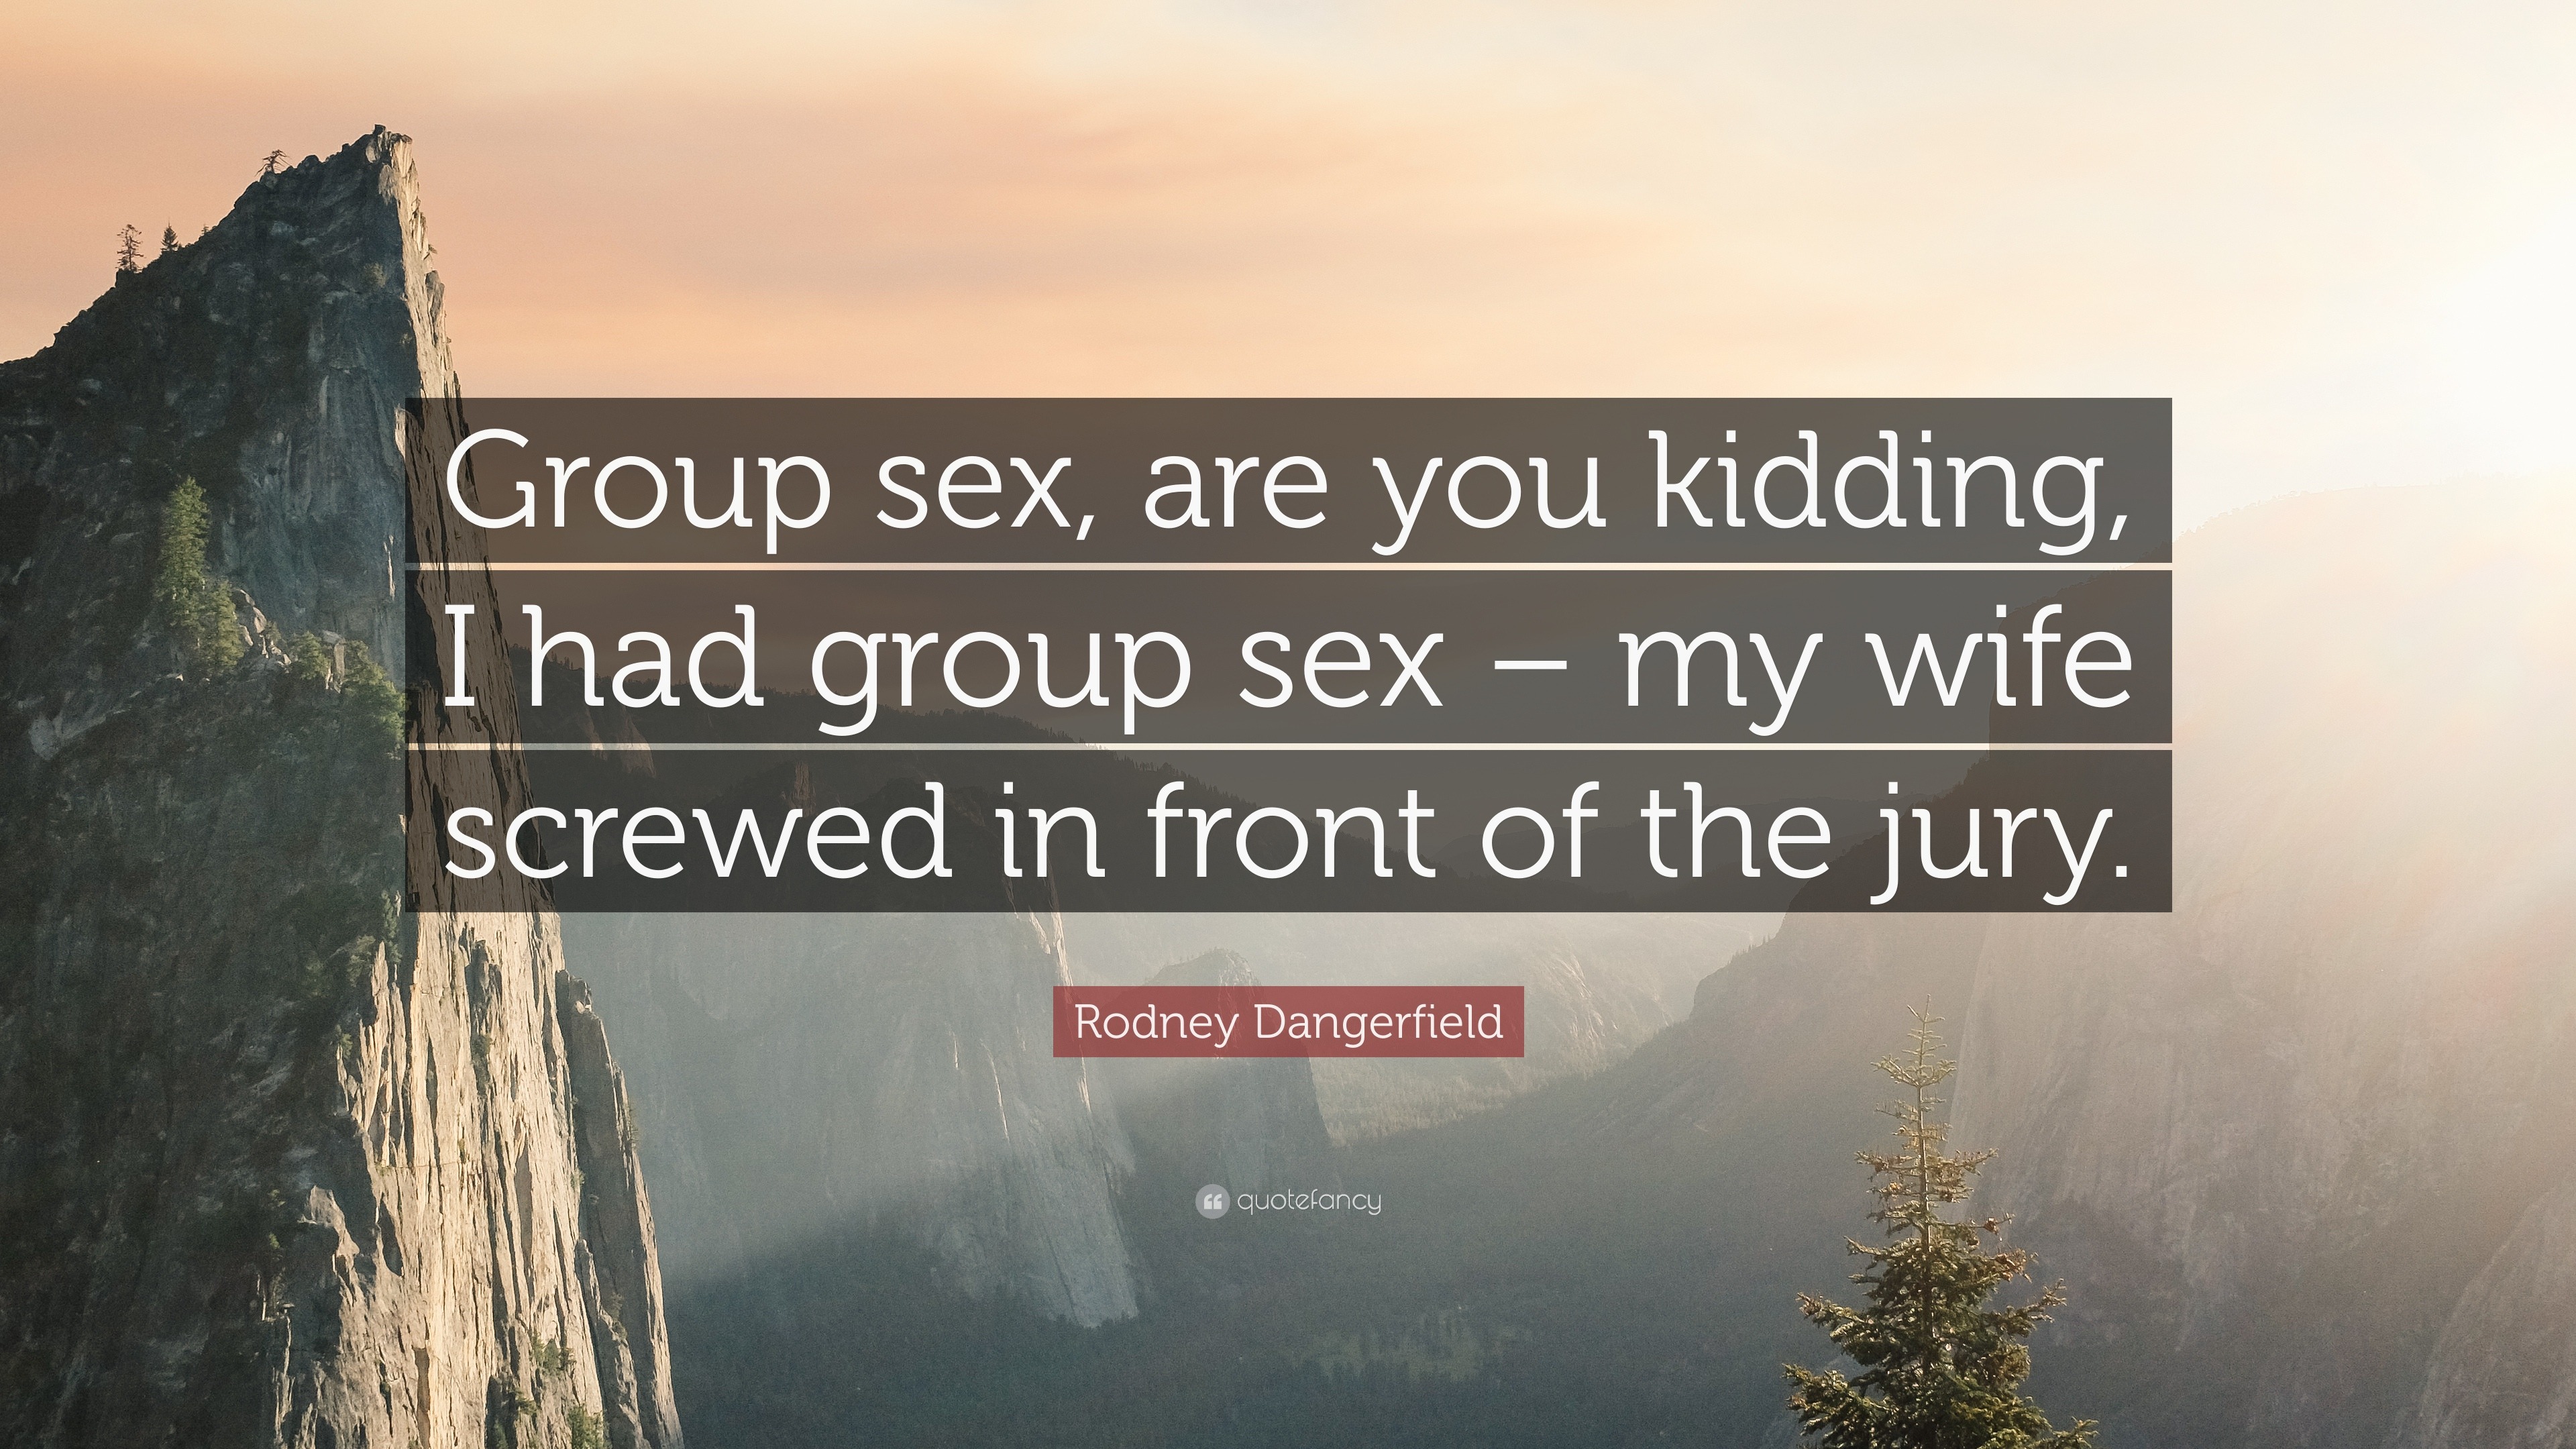 Rodney Dangerfield Quote “Group sex, are you kidding, I had group image